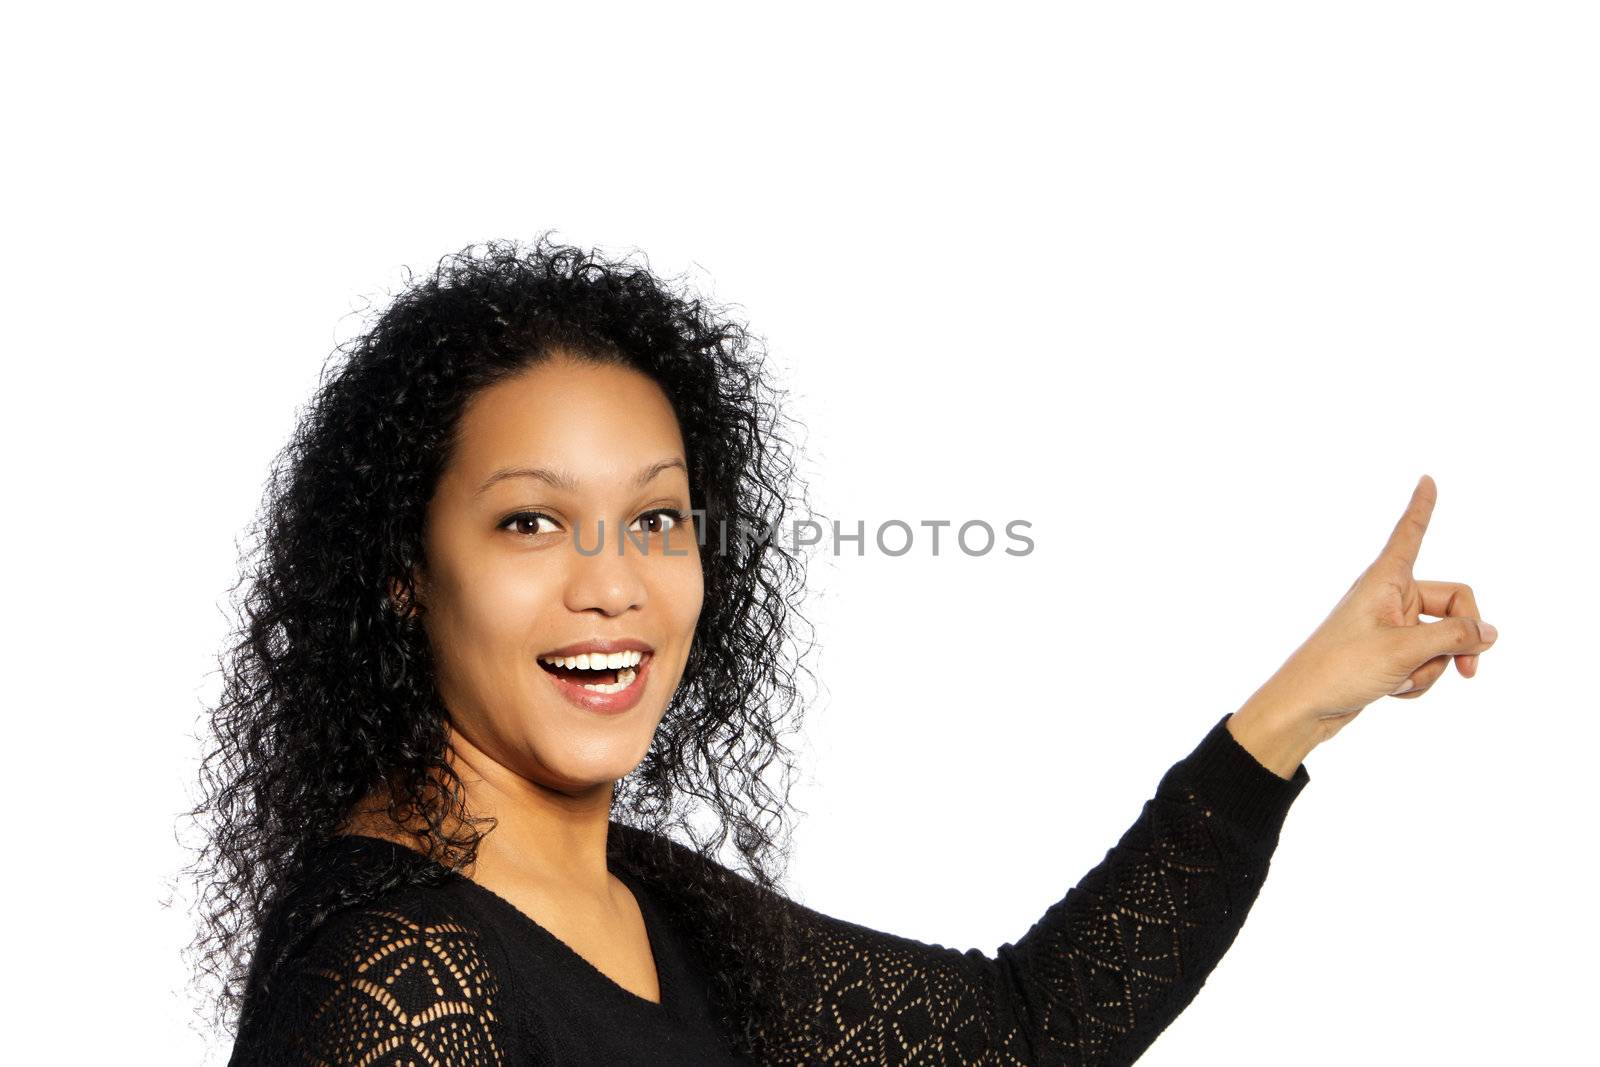 Surprised African American woman in pointing up gesture